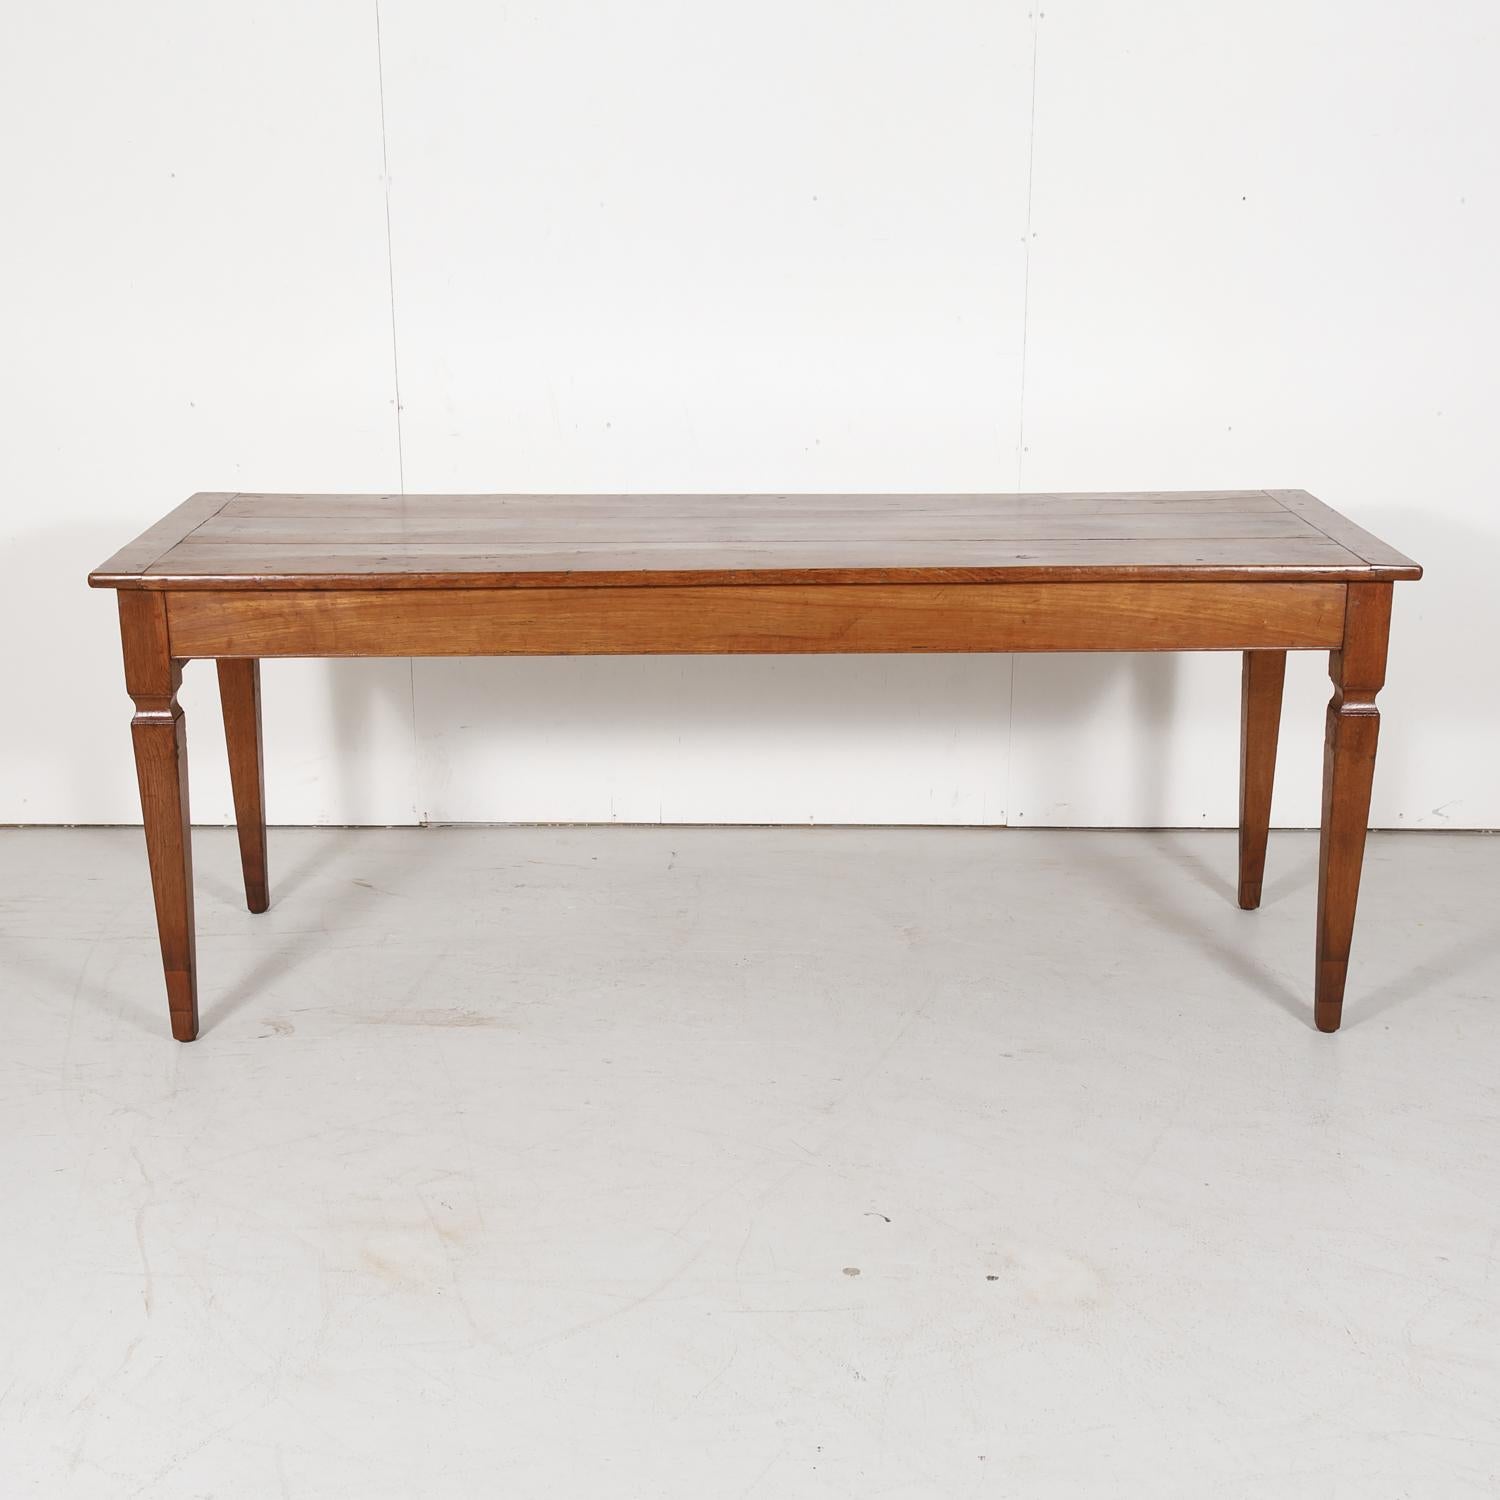 Handsome 19th century French Louis XVI style wild cherrywood farm table or console with a beautiful sun washed patina handcrafted near Brest, a port city in the Finistère department in Brittany, having a rectangular plank top raised on tapered legs